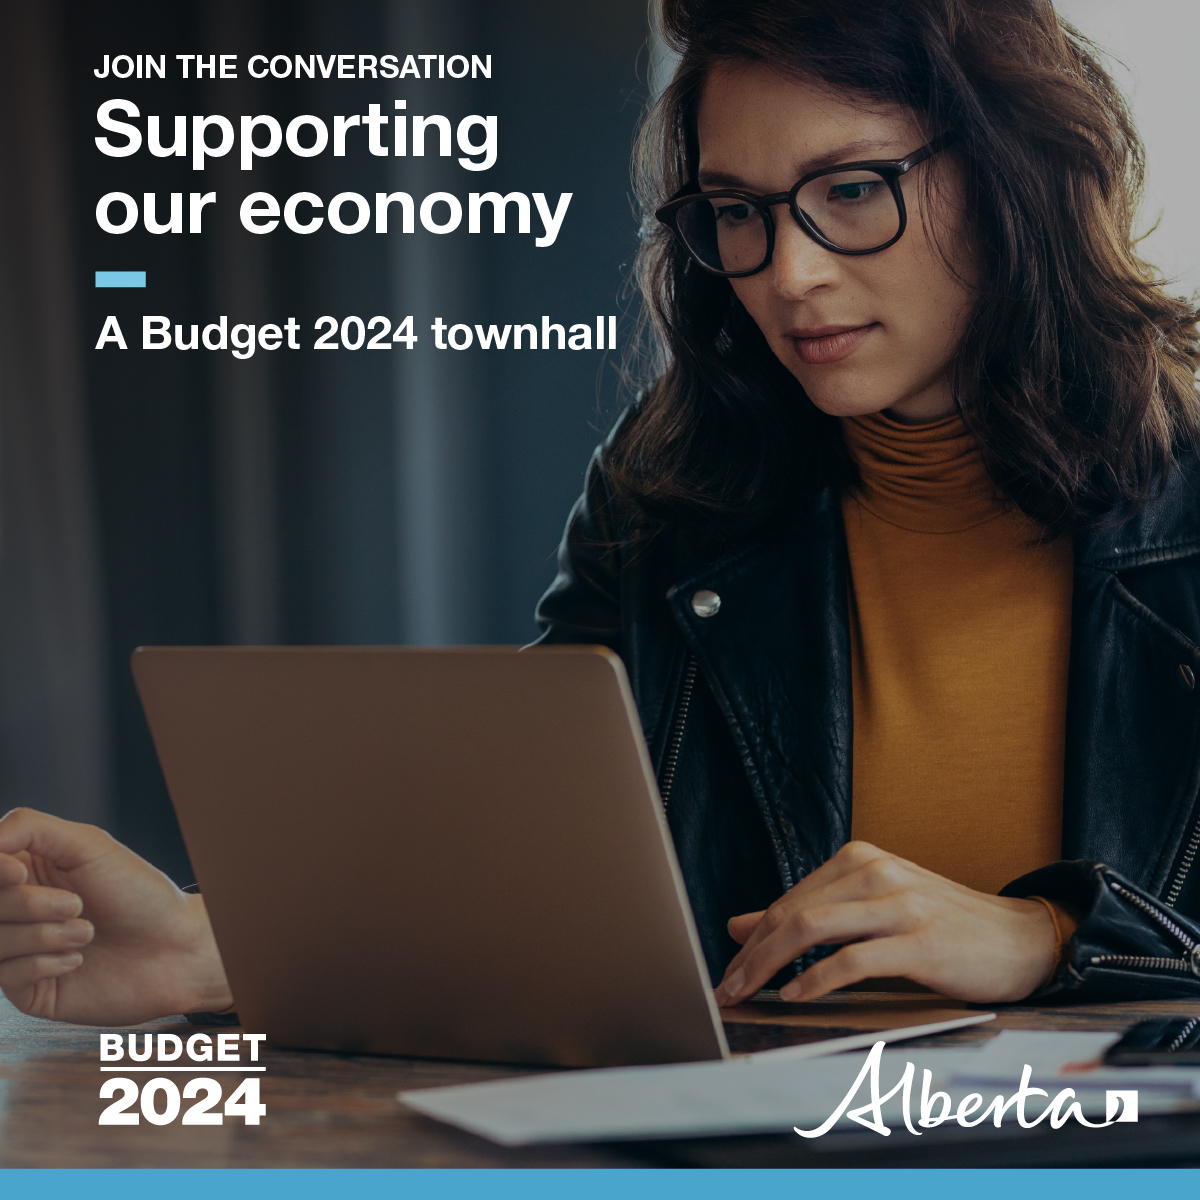 Join Ministers @MattJonesYYC, @RajanJSaw, @nateglubish and @DevinDVote for a telephone town hall to learn more about how Budget 2024 supports our economy. Northern Alberta April 8 from 7:00 – 8:30PM Learn more: alberta.ca/budgettownhalls